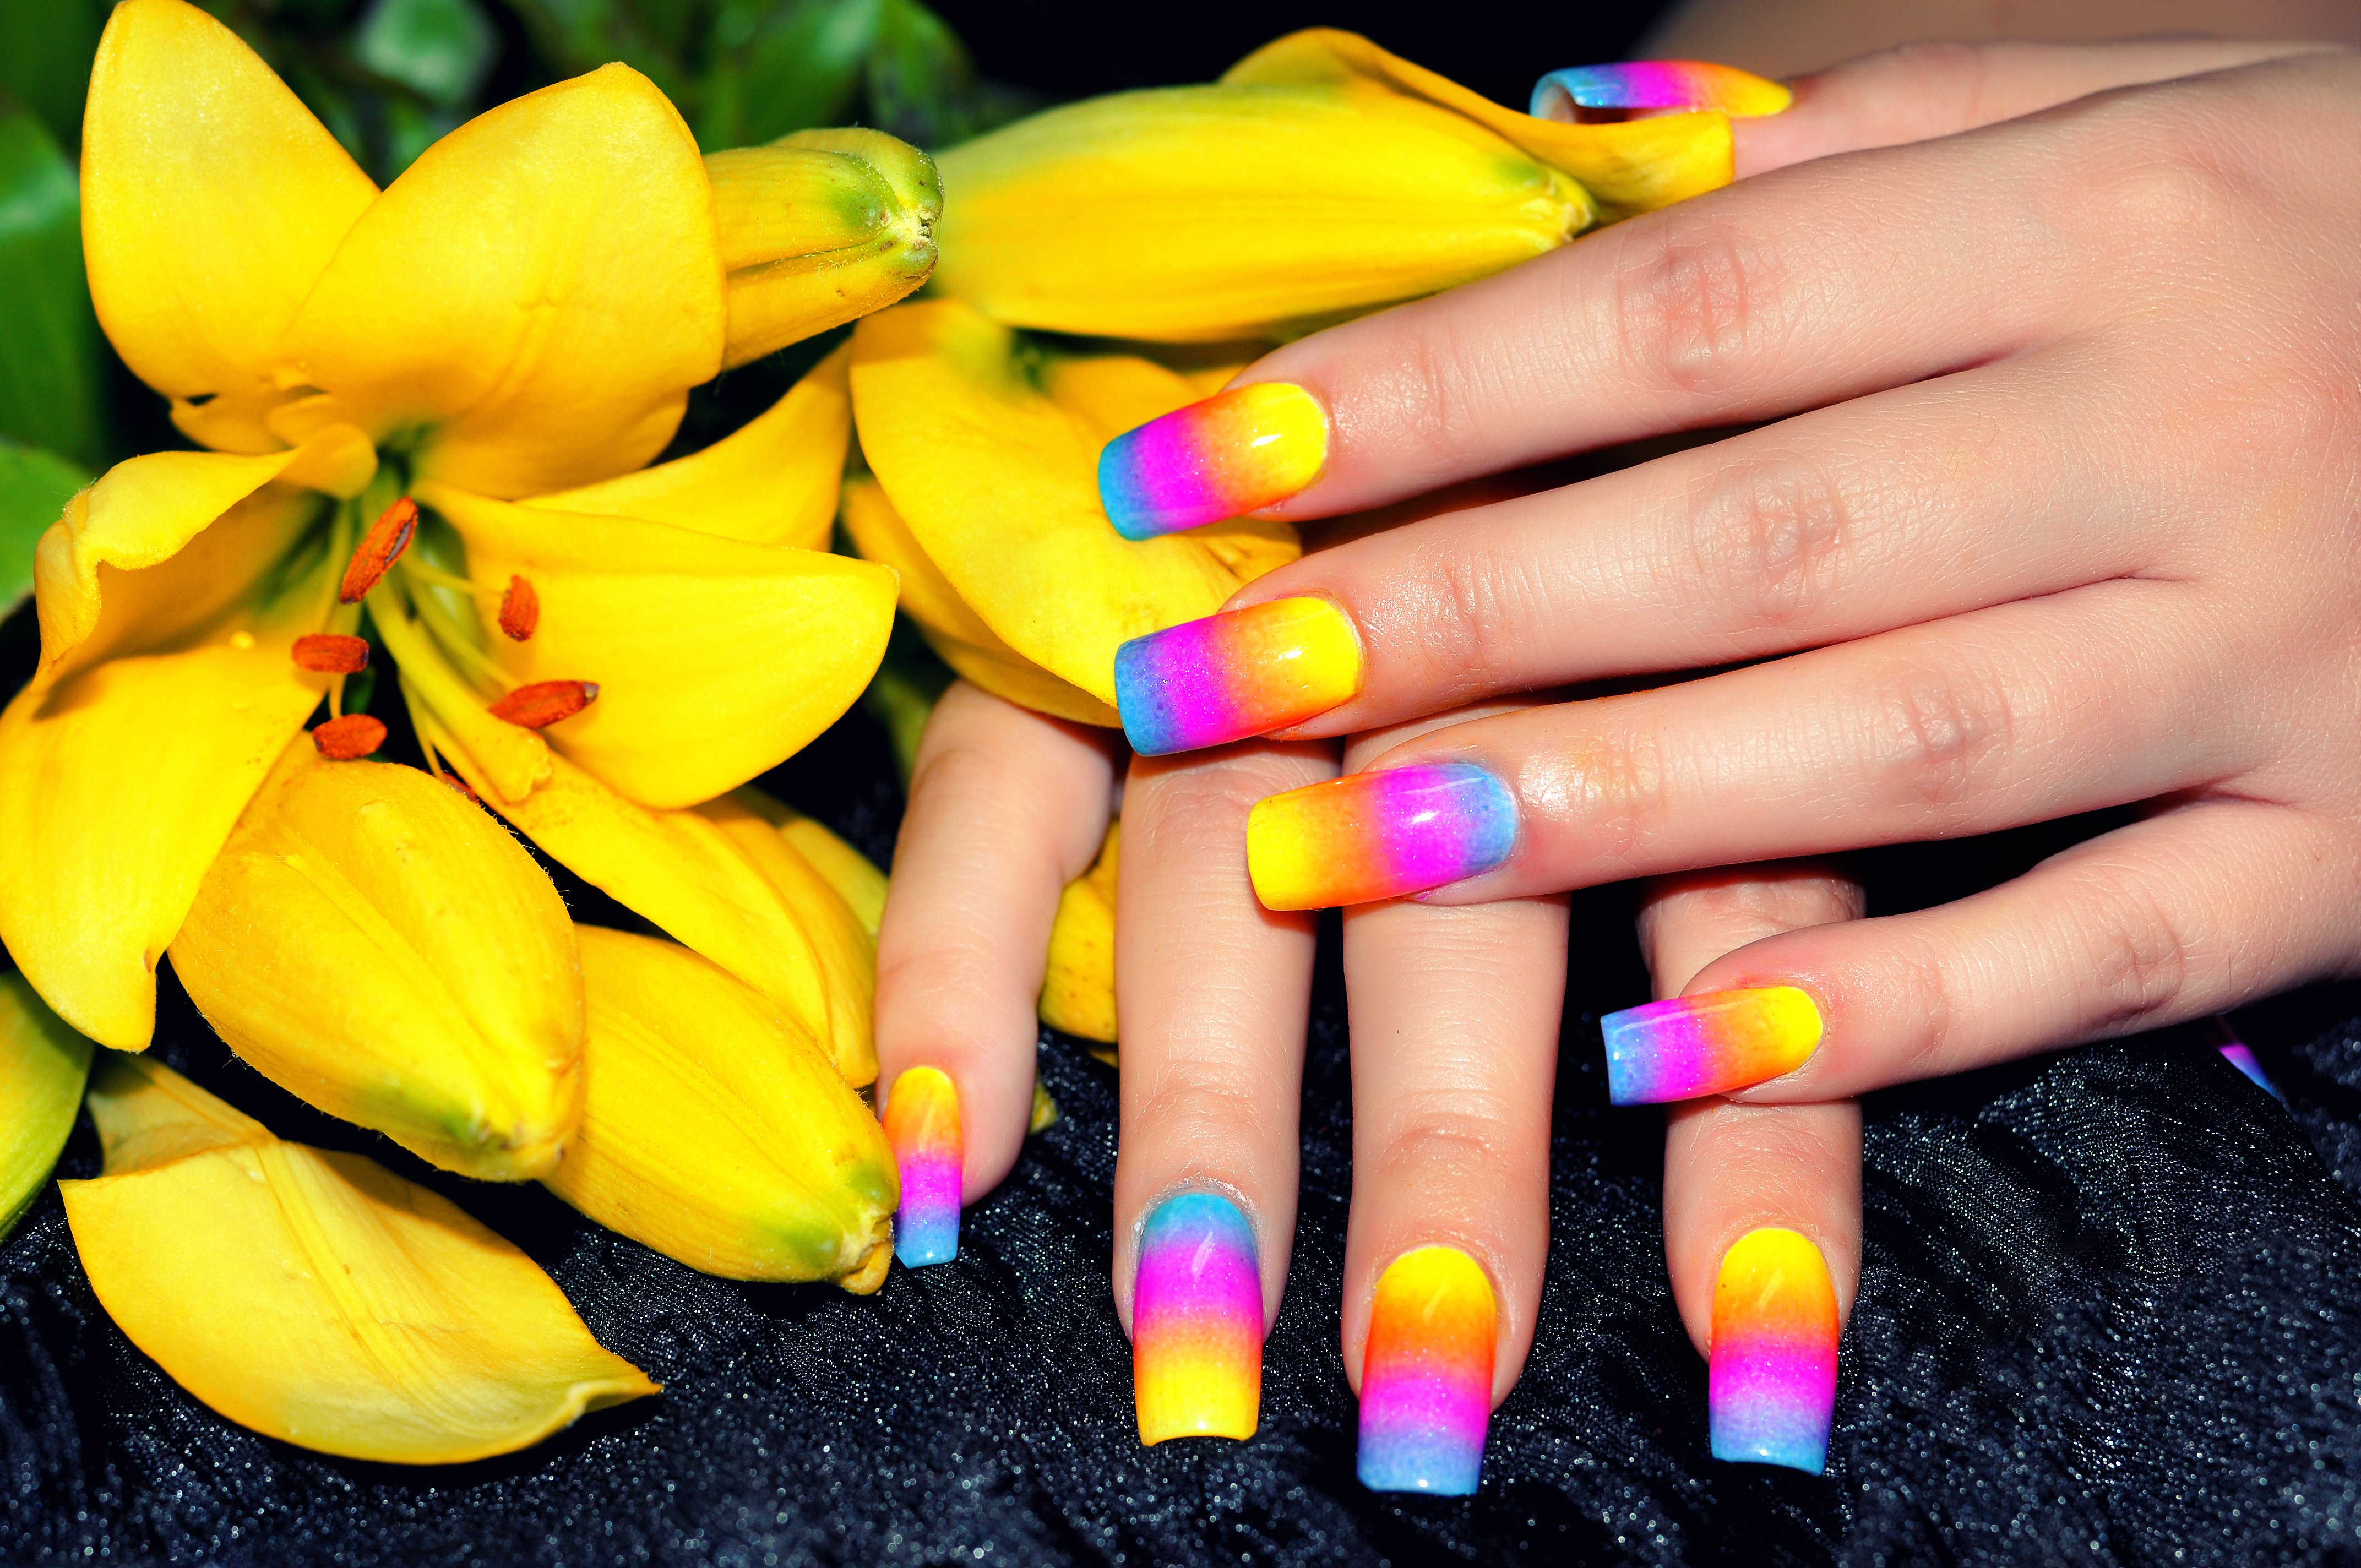 Rainbow Nails. | Source: Getty Images